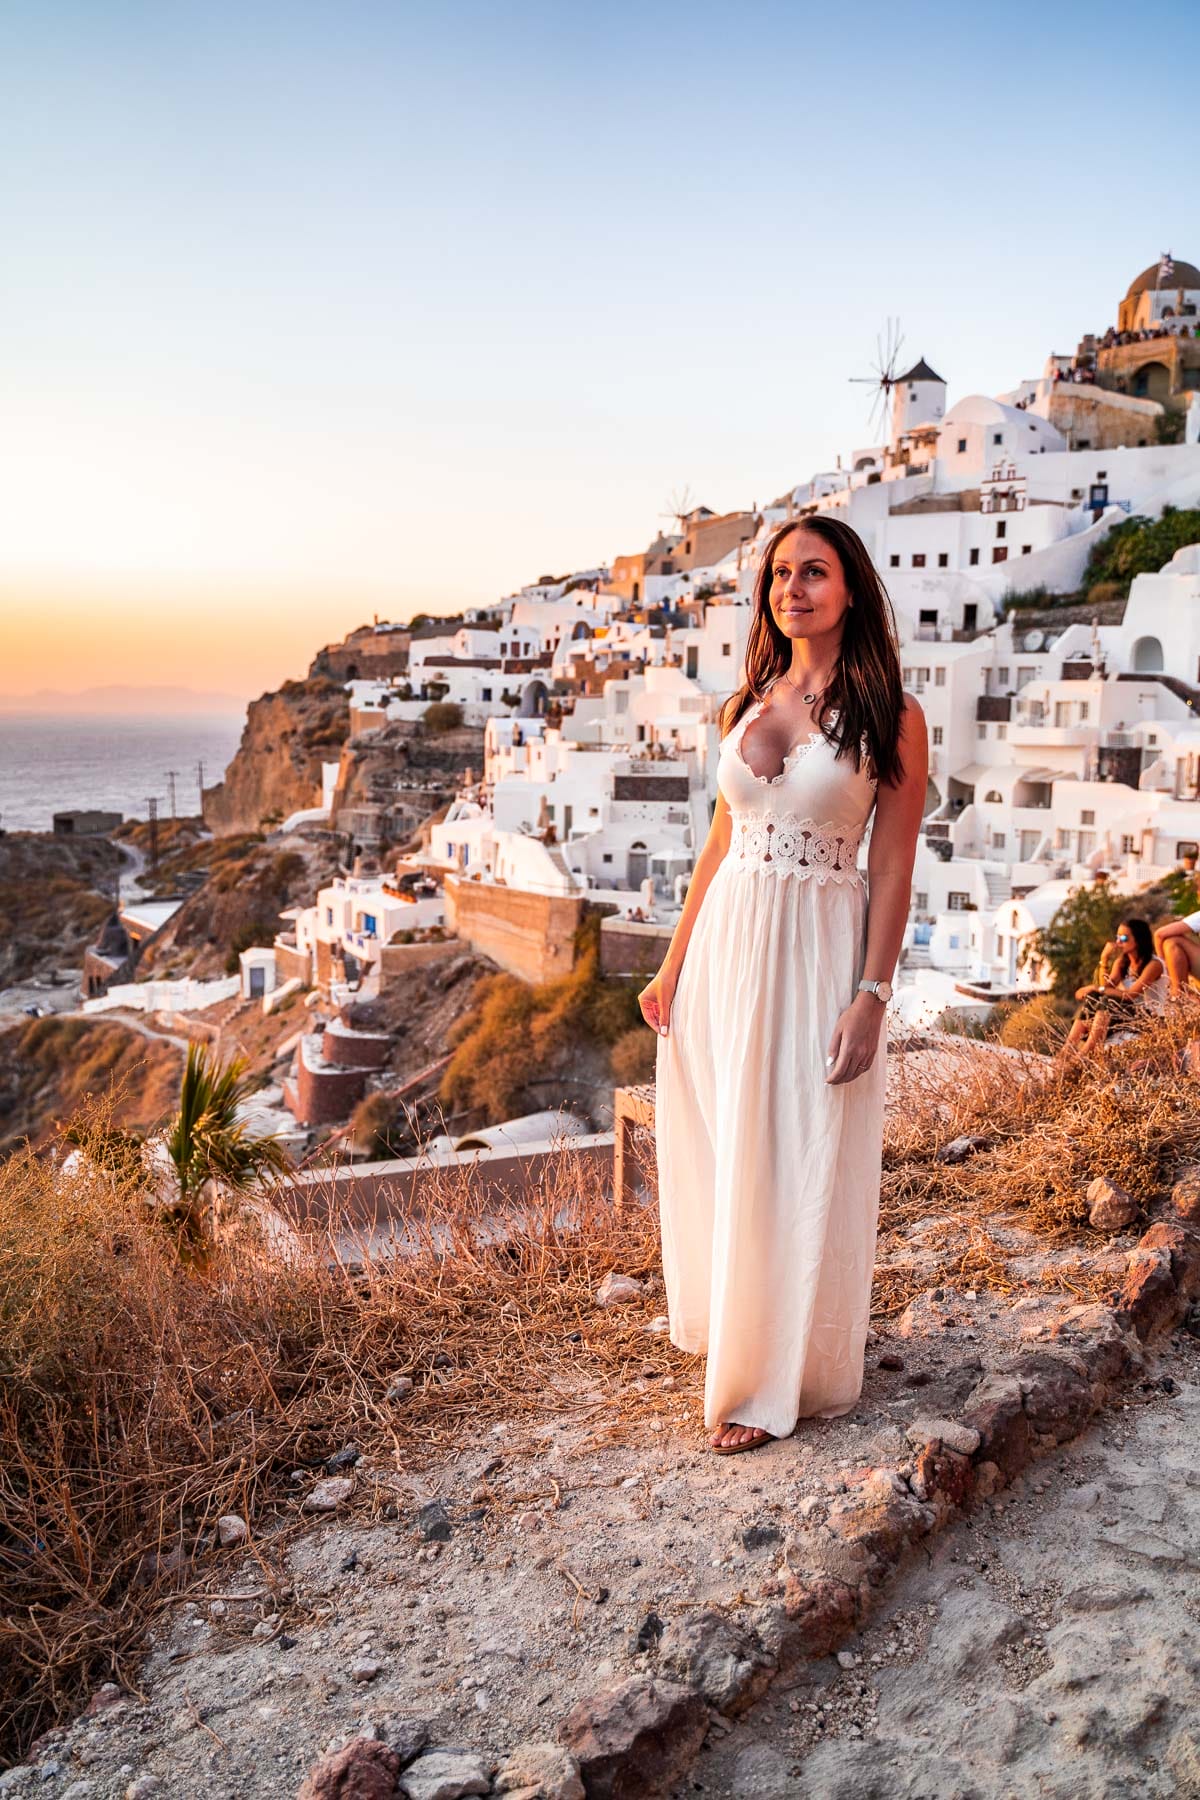 Girl in a white dress watching the sunset in Oia, Santorini